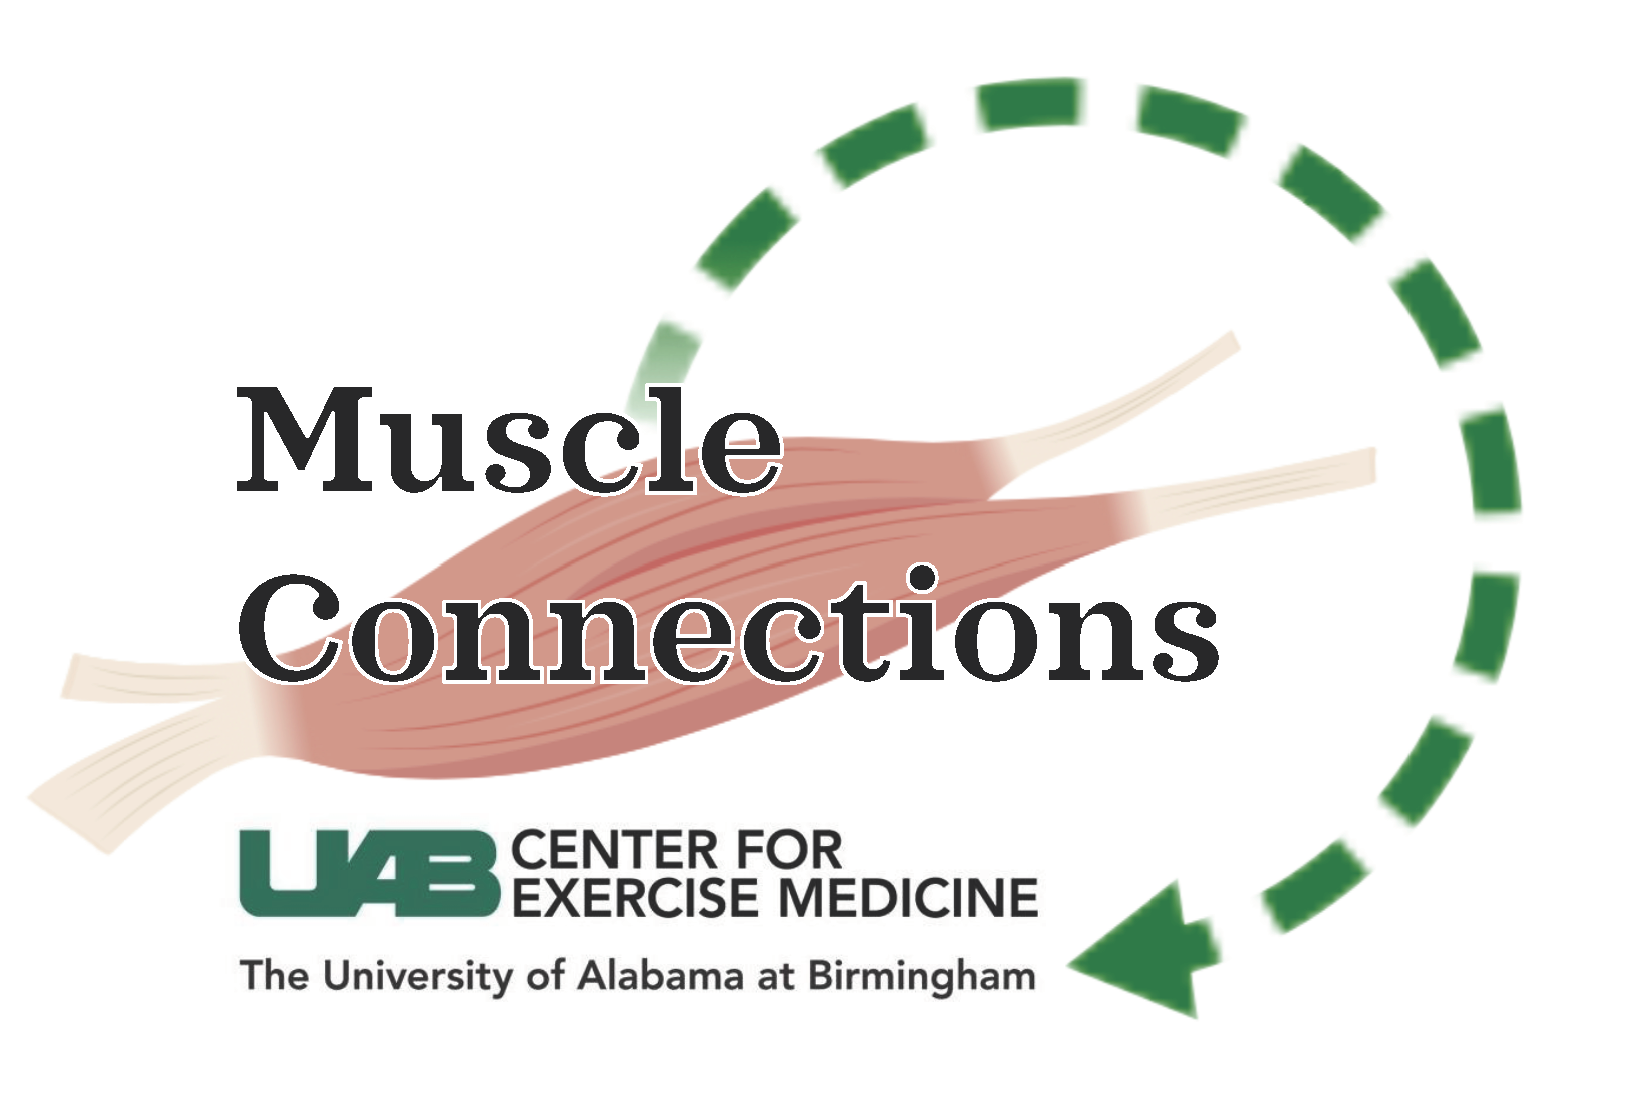 Muscle Connections image